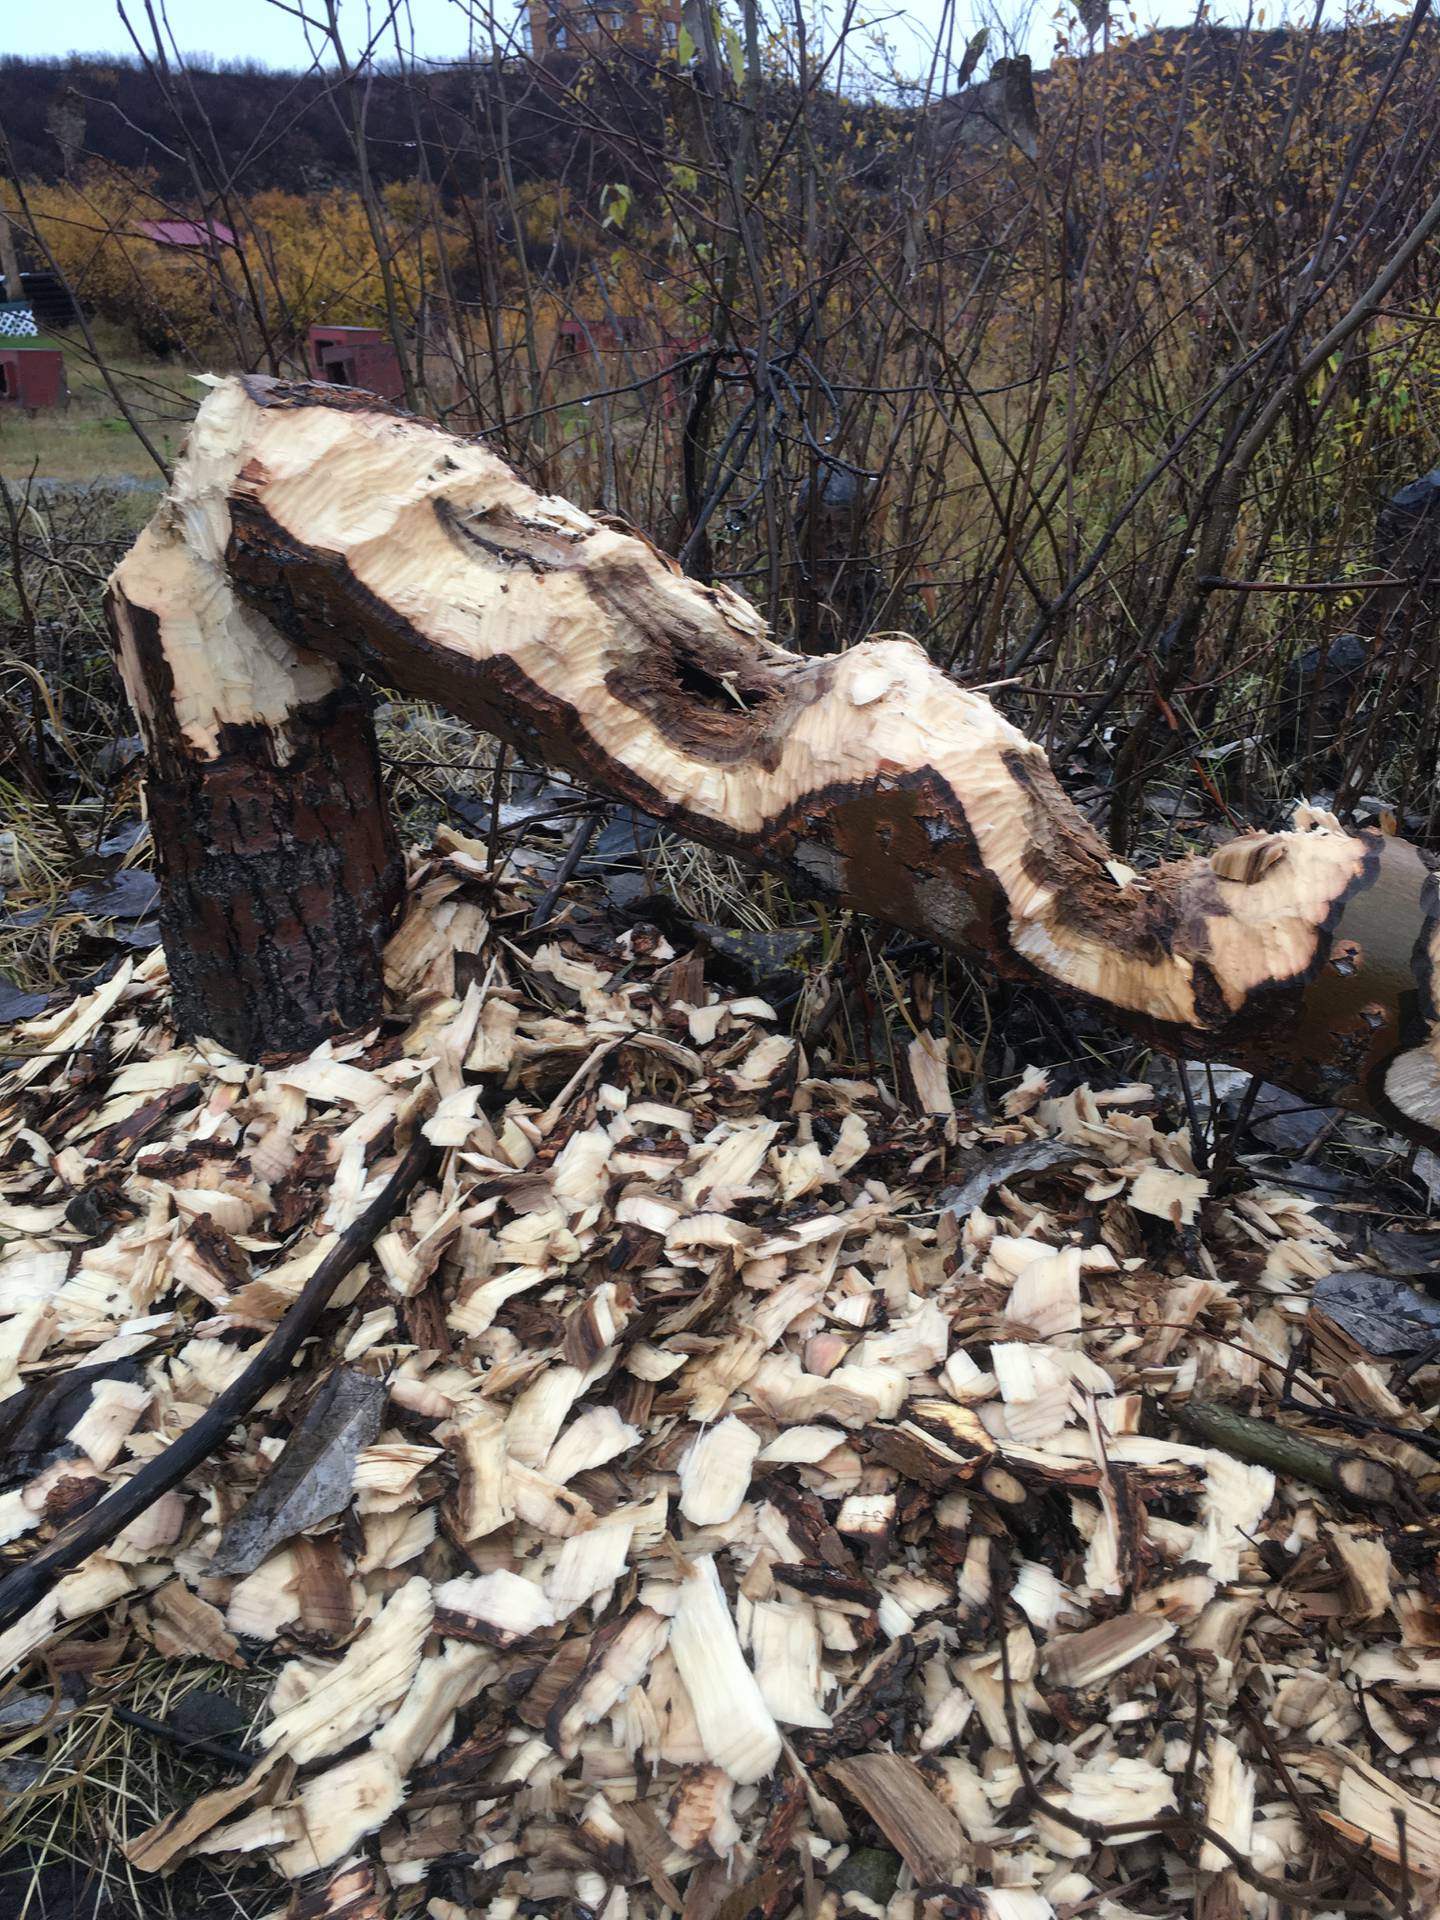 The remains of the last poplar in the yard at one of John Schandelmeier's cabins on the Denali Highway